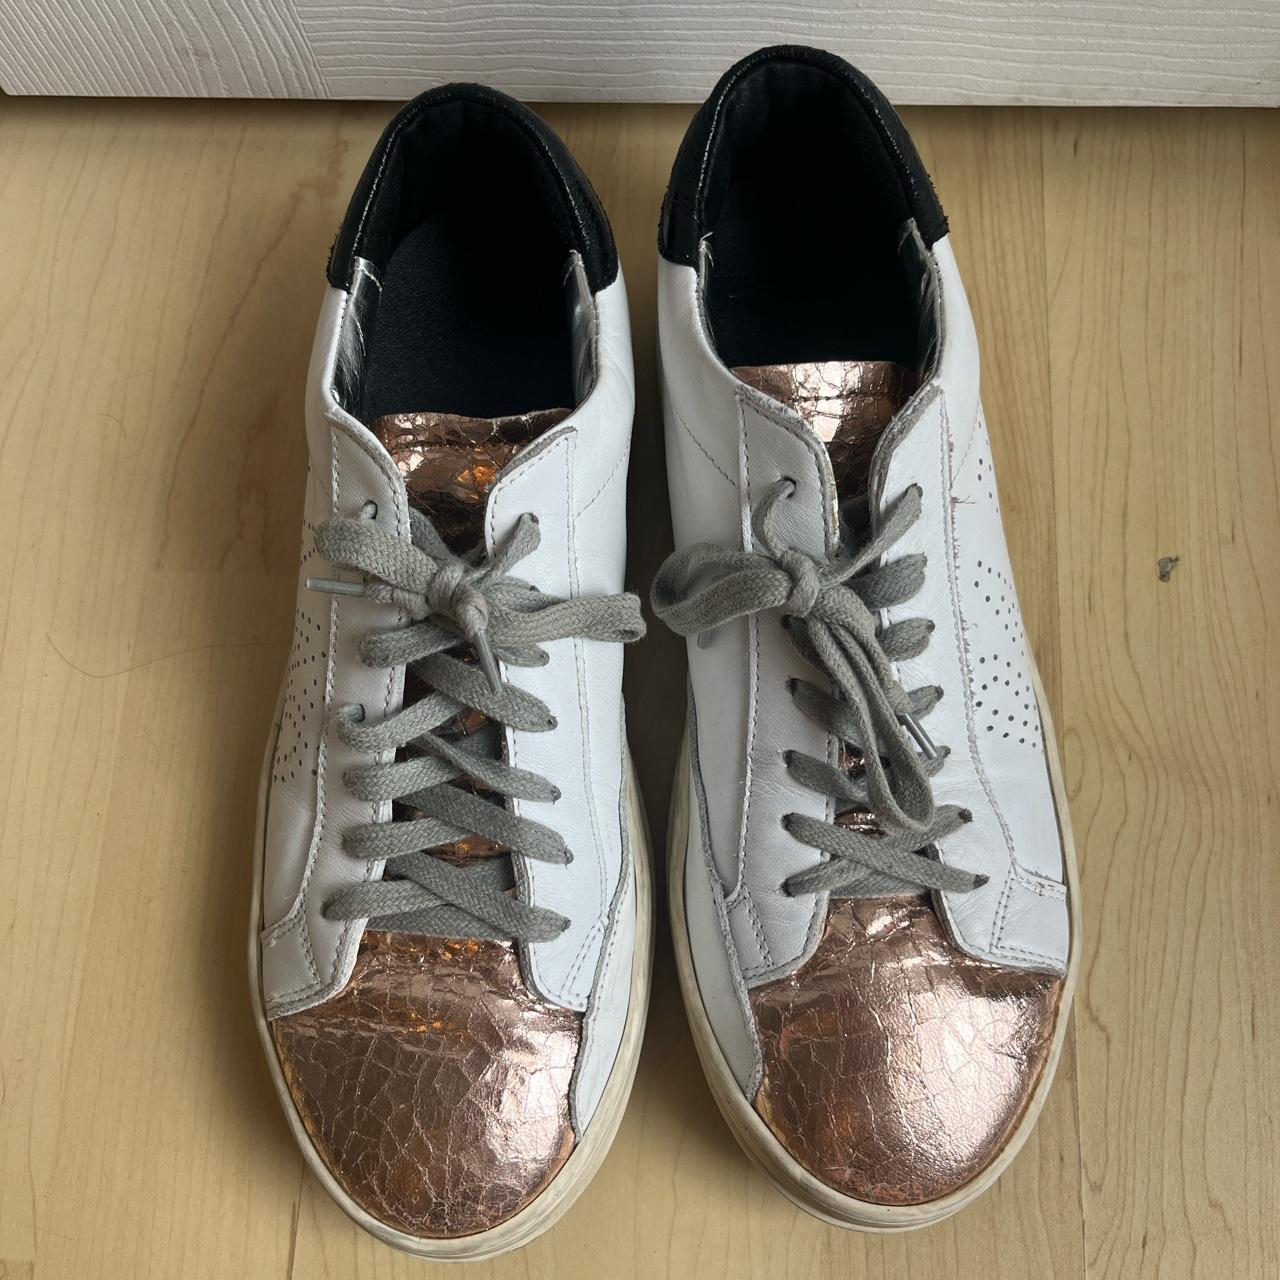 P448 Rose Gold Sneakers Size US8/EU39! I bought... - Depop